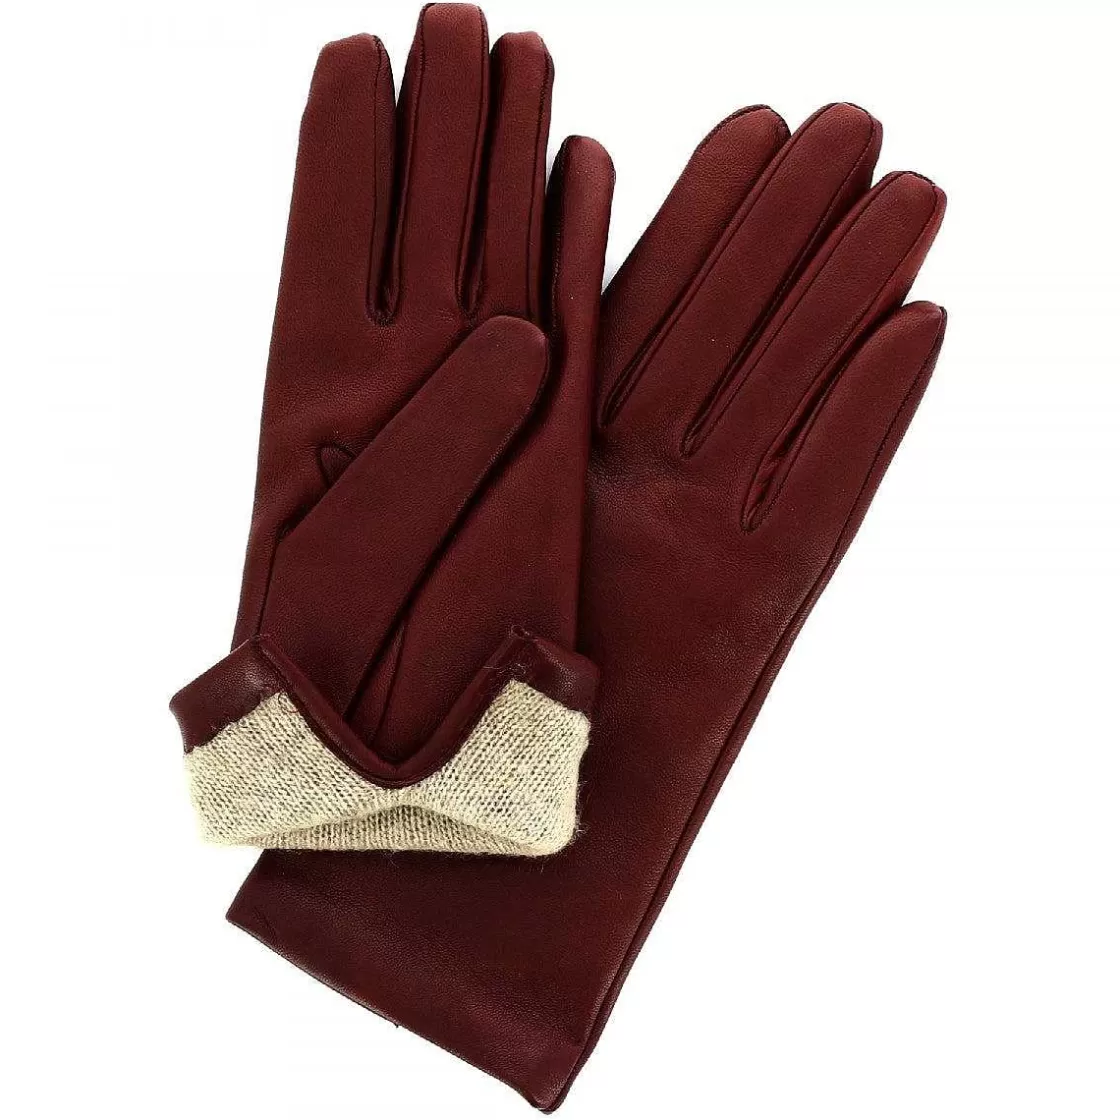 Leonardo Classic Women'S Handmade Gloves In Burgundy Nappa Leather Lined In Cashmere Clearance